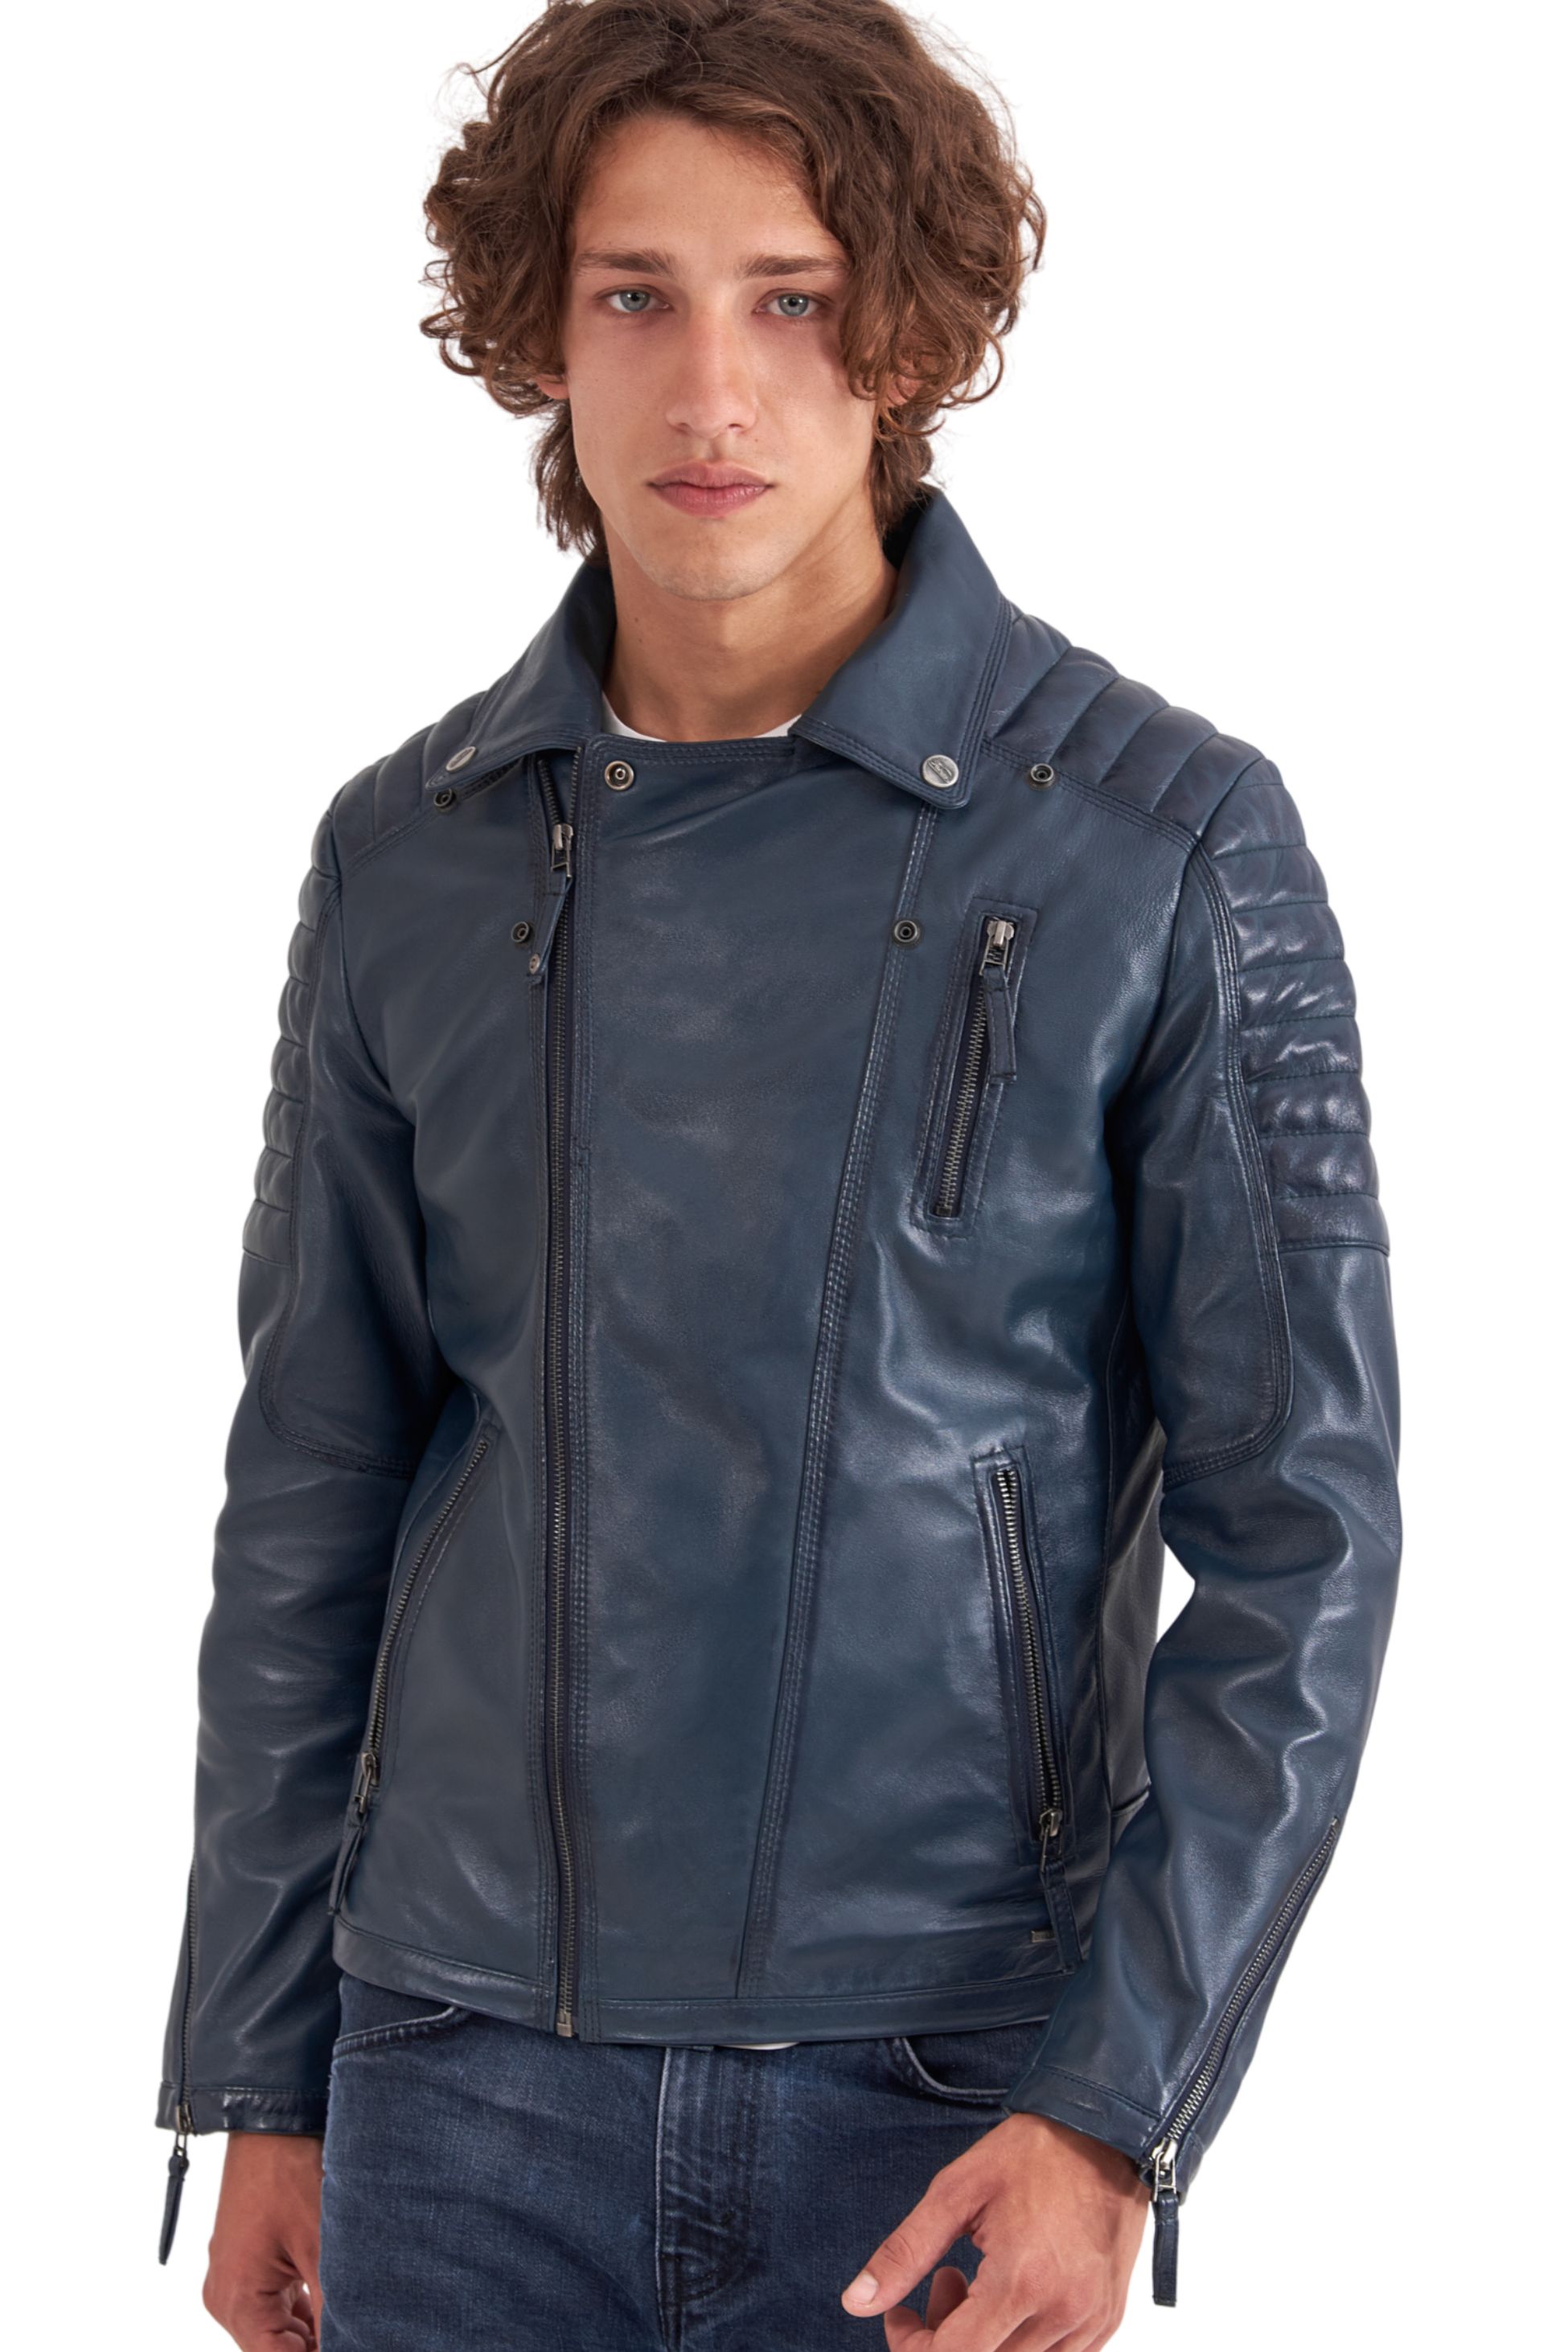 CHARLIE SHEEP BLUE - AUTHENTIC MENS LEATHER JACKET